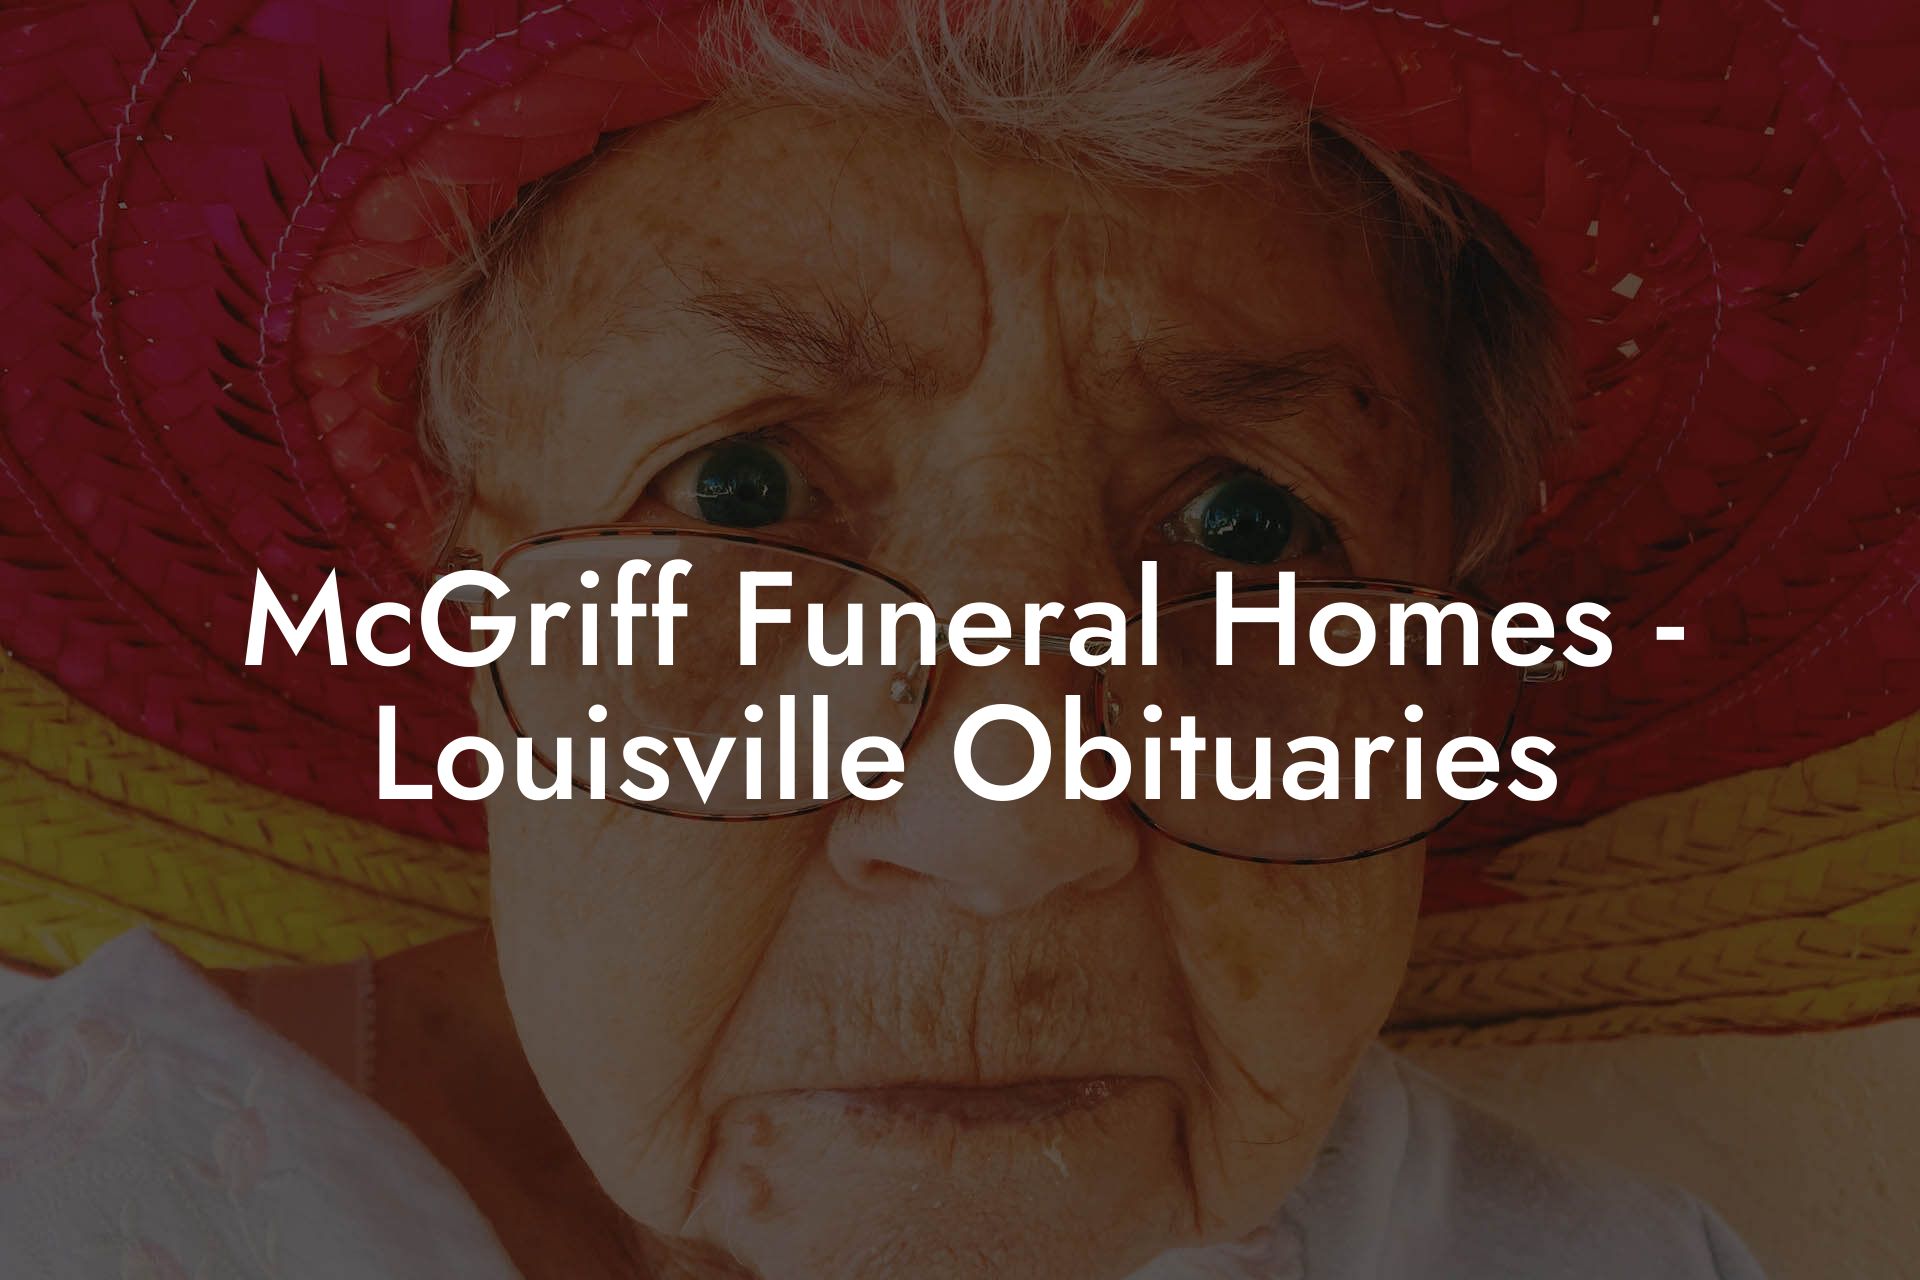 McGriff Funeral Homes - Louisville Obituaries